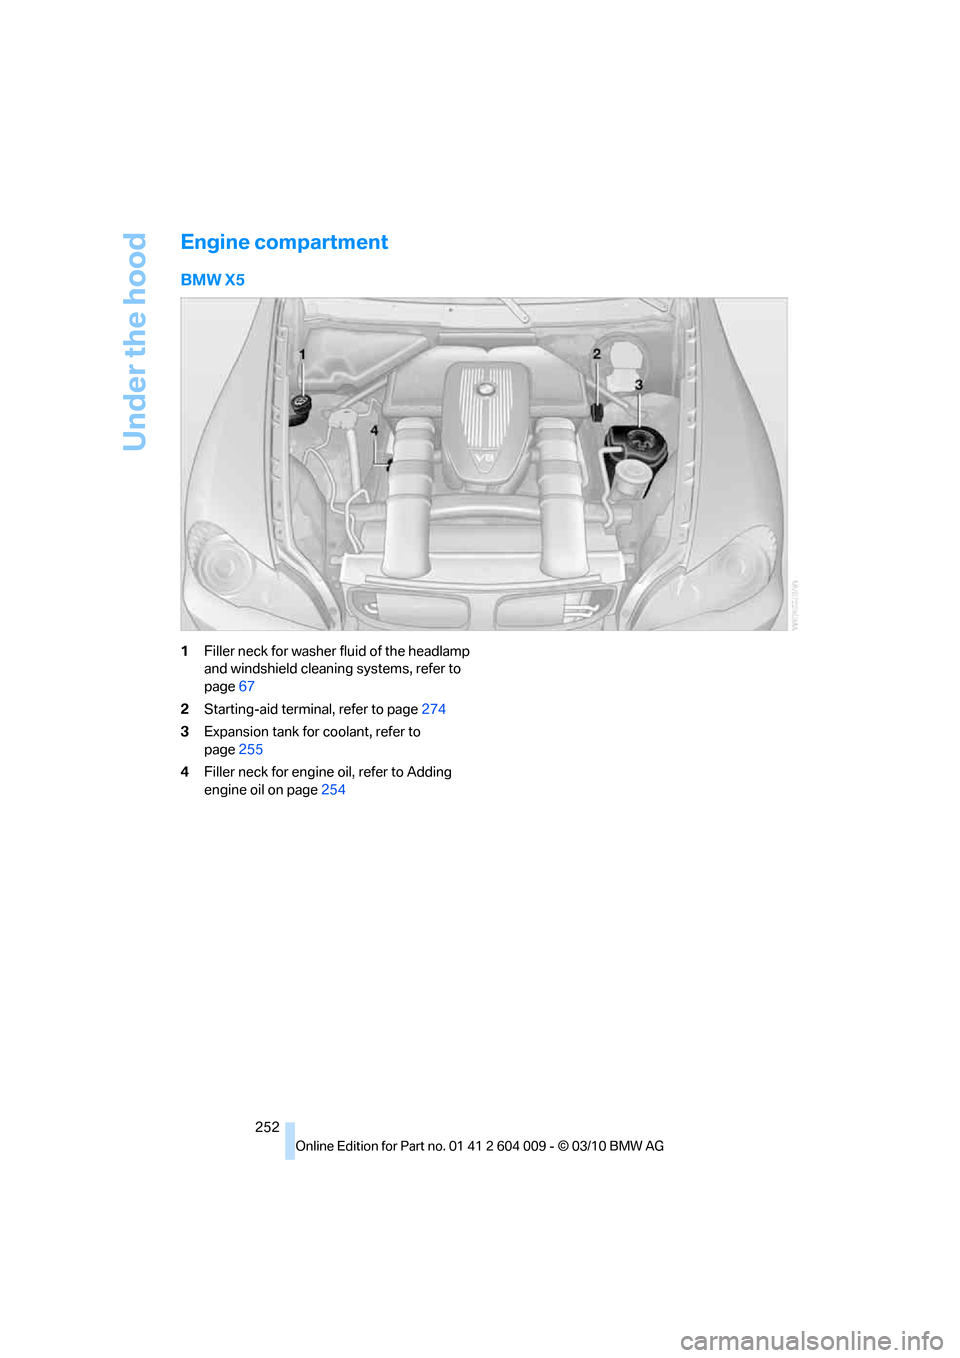 BMW X5 2011 E70 Owners Manual Under the hood
252
Engine compartment
BMW X5
1Filler neck for washer fluid of the headlamp 
and windshield cleaning systems, refer to 
page67
2Starting-aid terminal, refer to page274
3Expansion tank f